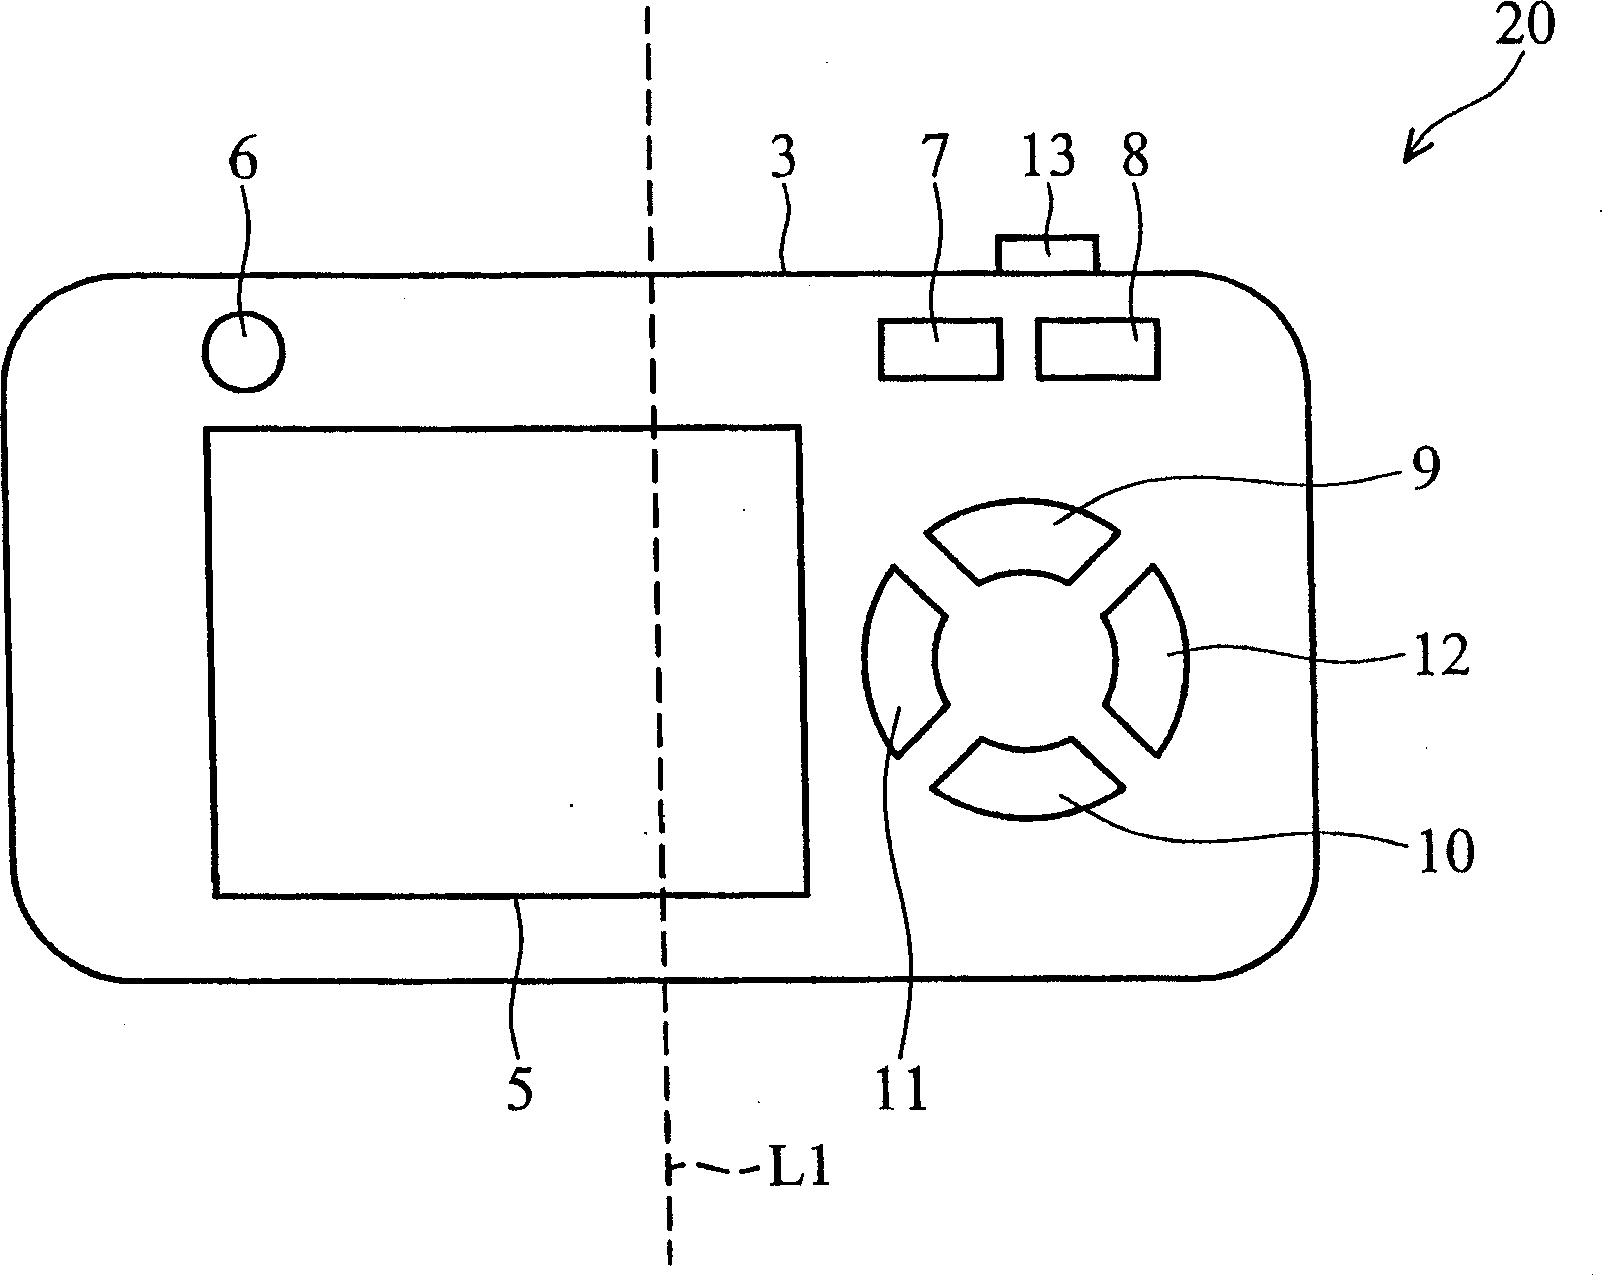 Hand-held image acquisition system and its controlling method